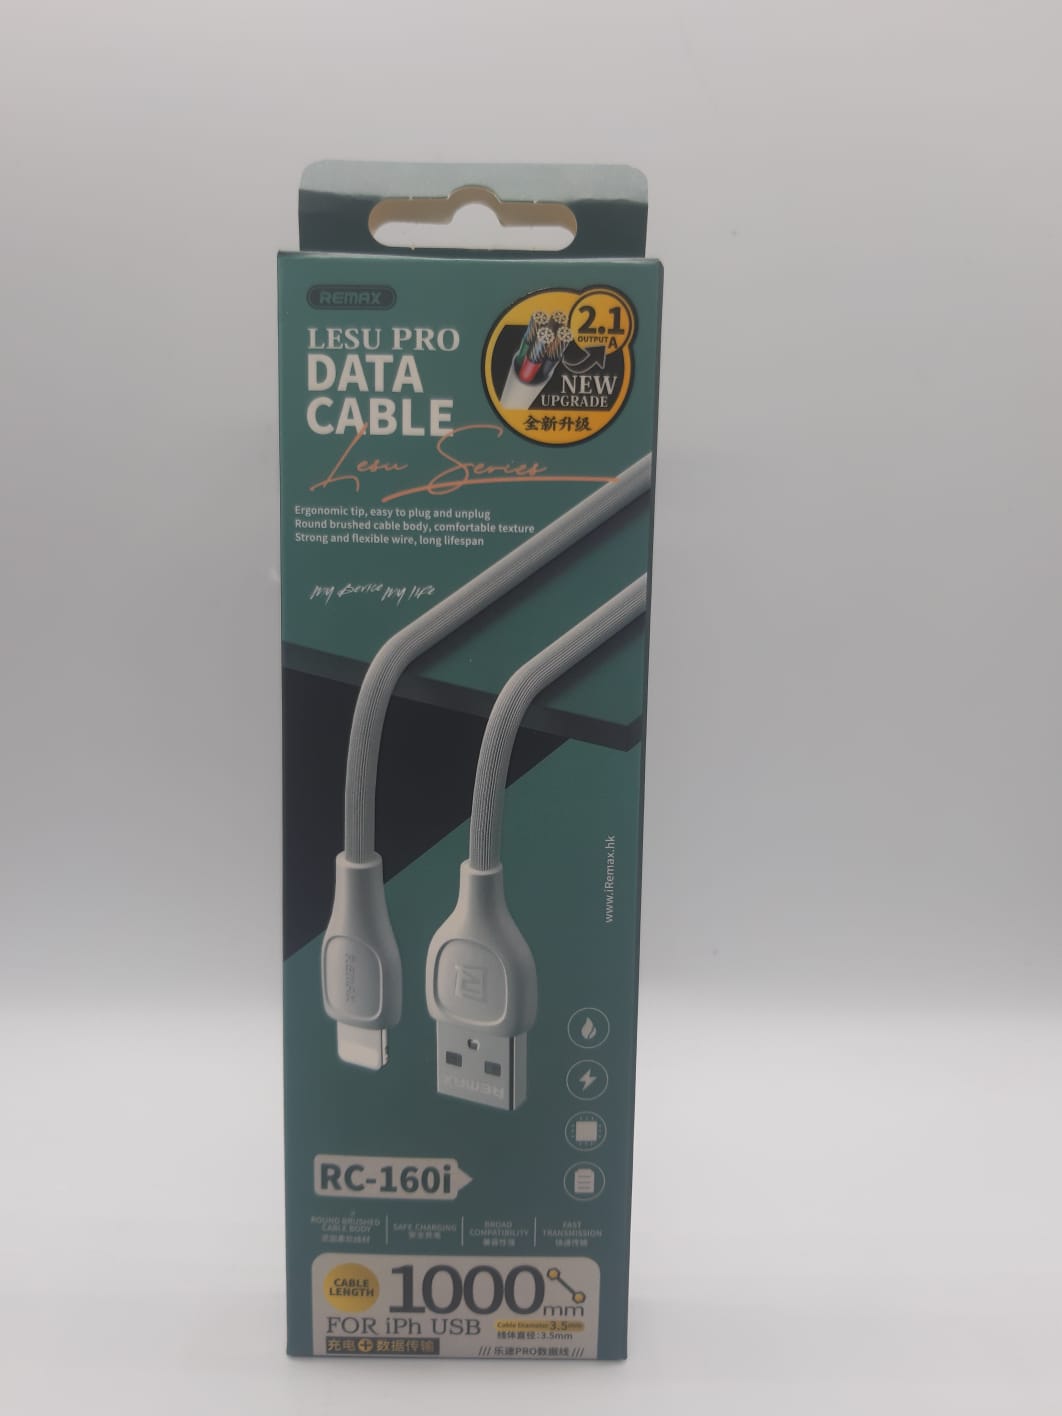 REMAX-RC-160I LESU PRO SERIES DATA CABLE FOR i phone (1M)